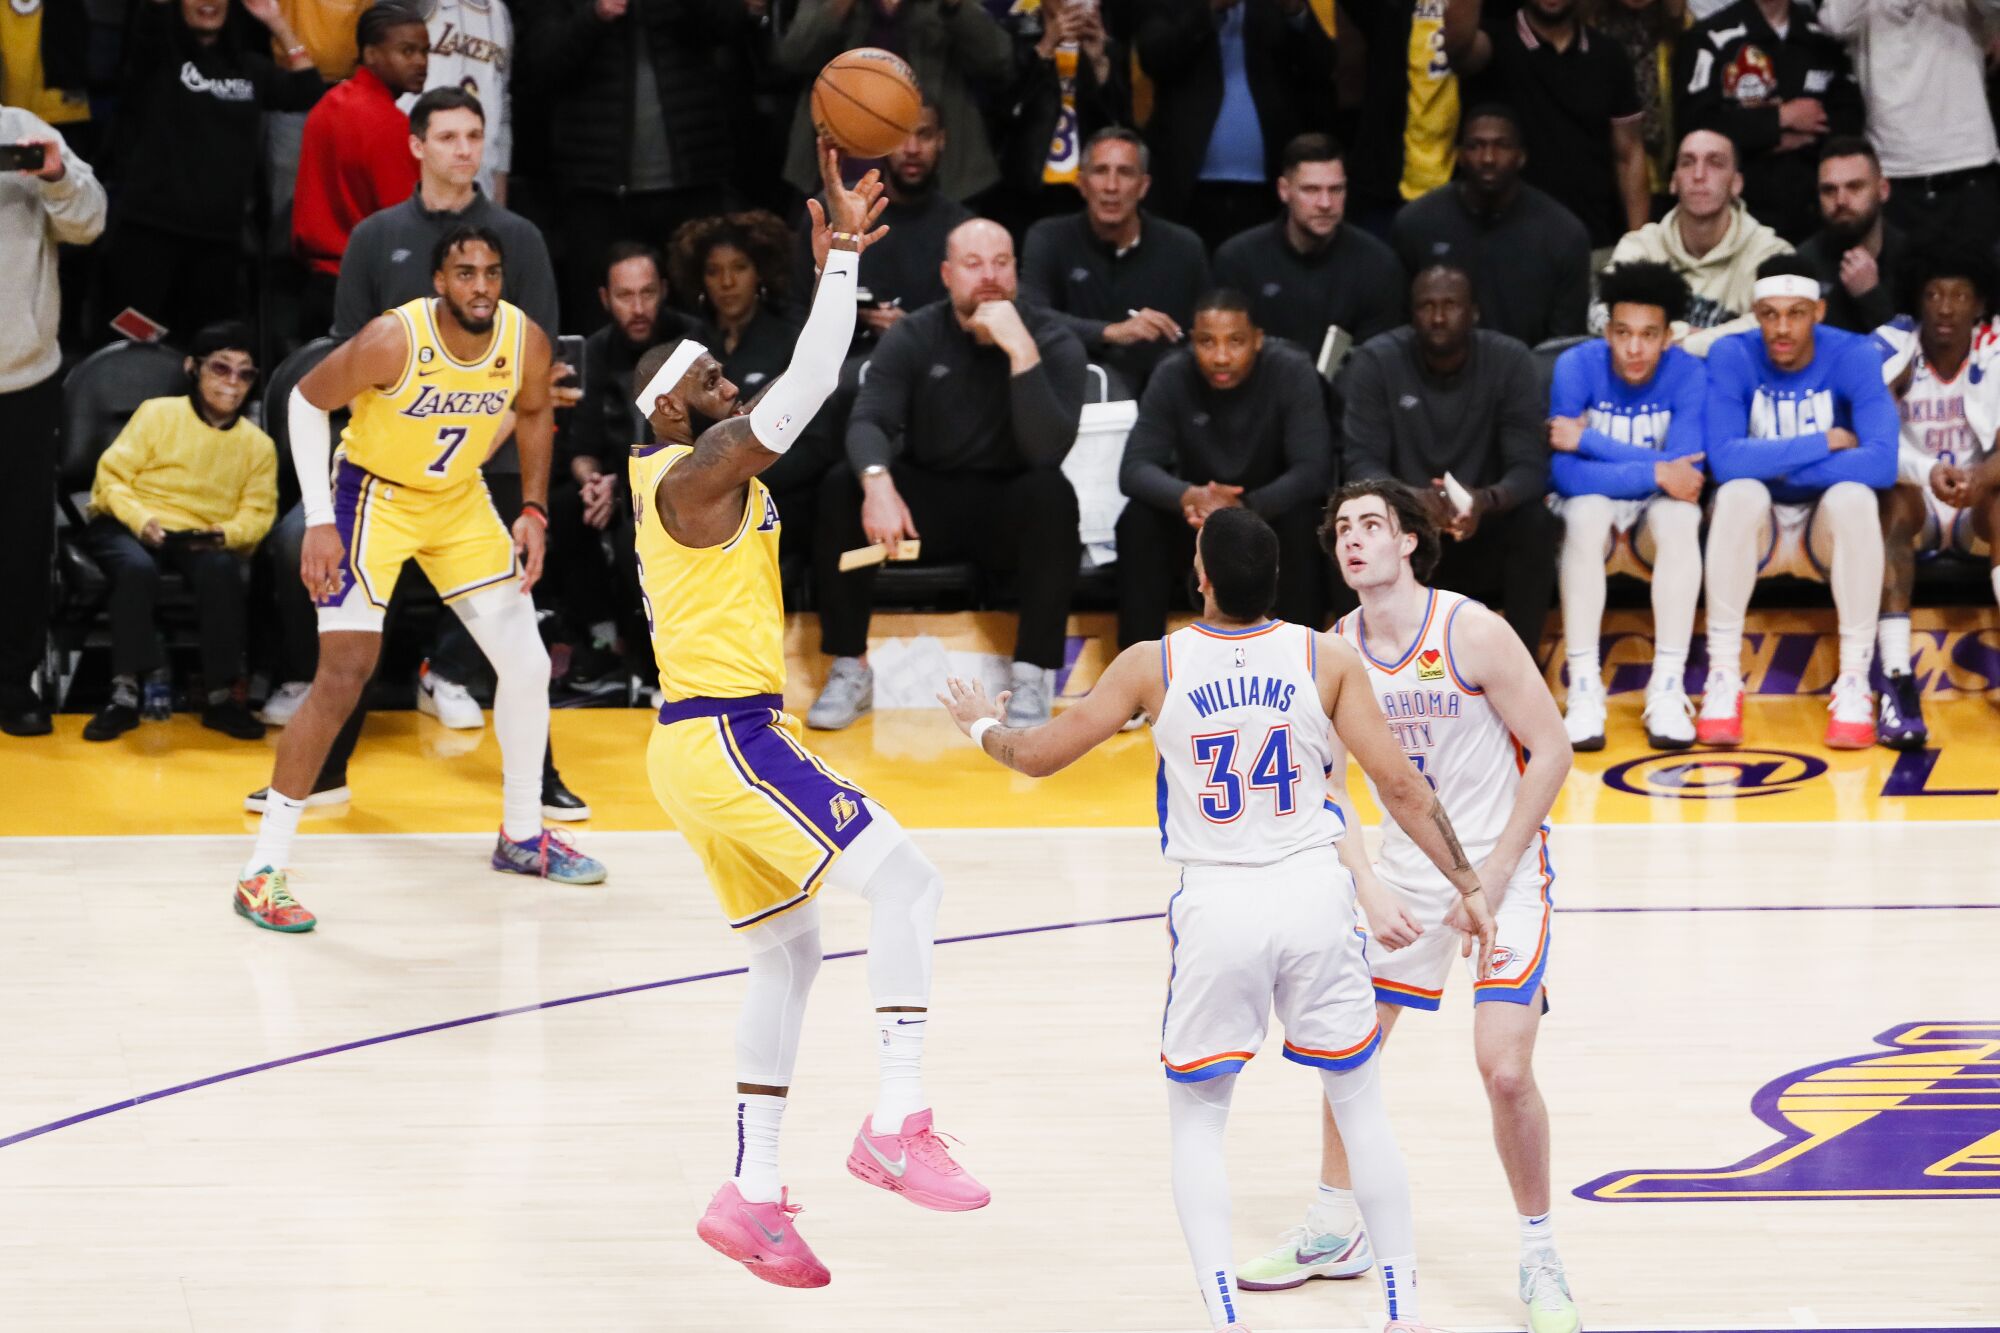 Lakers forward LeBron James releases the shot over Thunder forward Kenrich Williams that gave him the all-time score record.